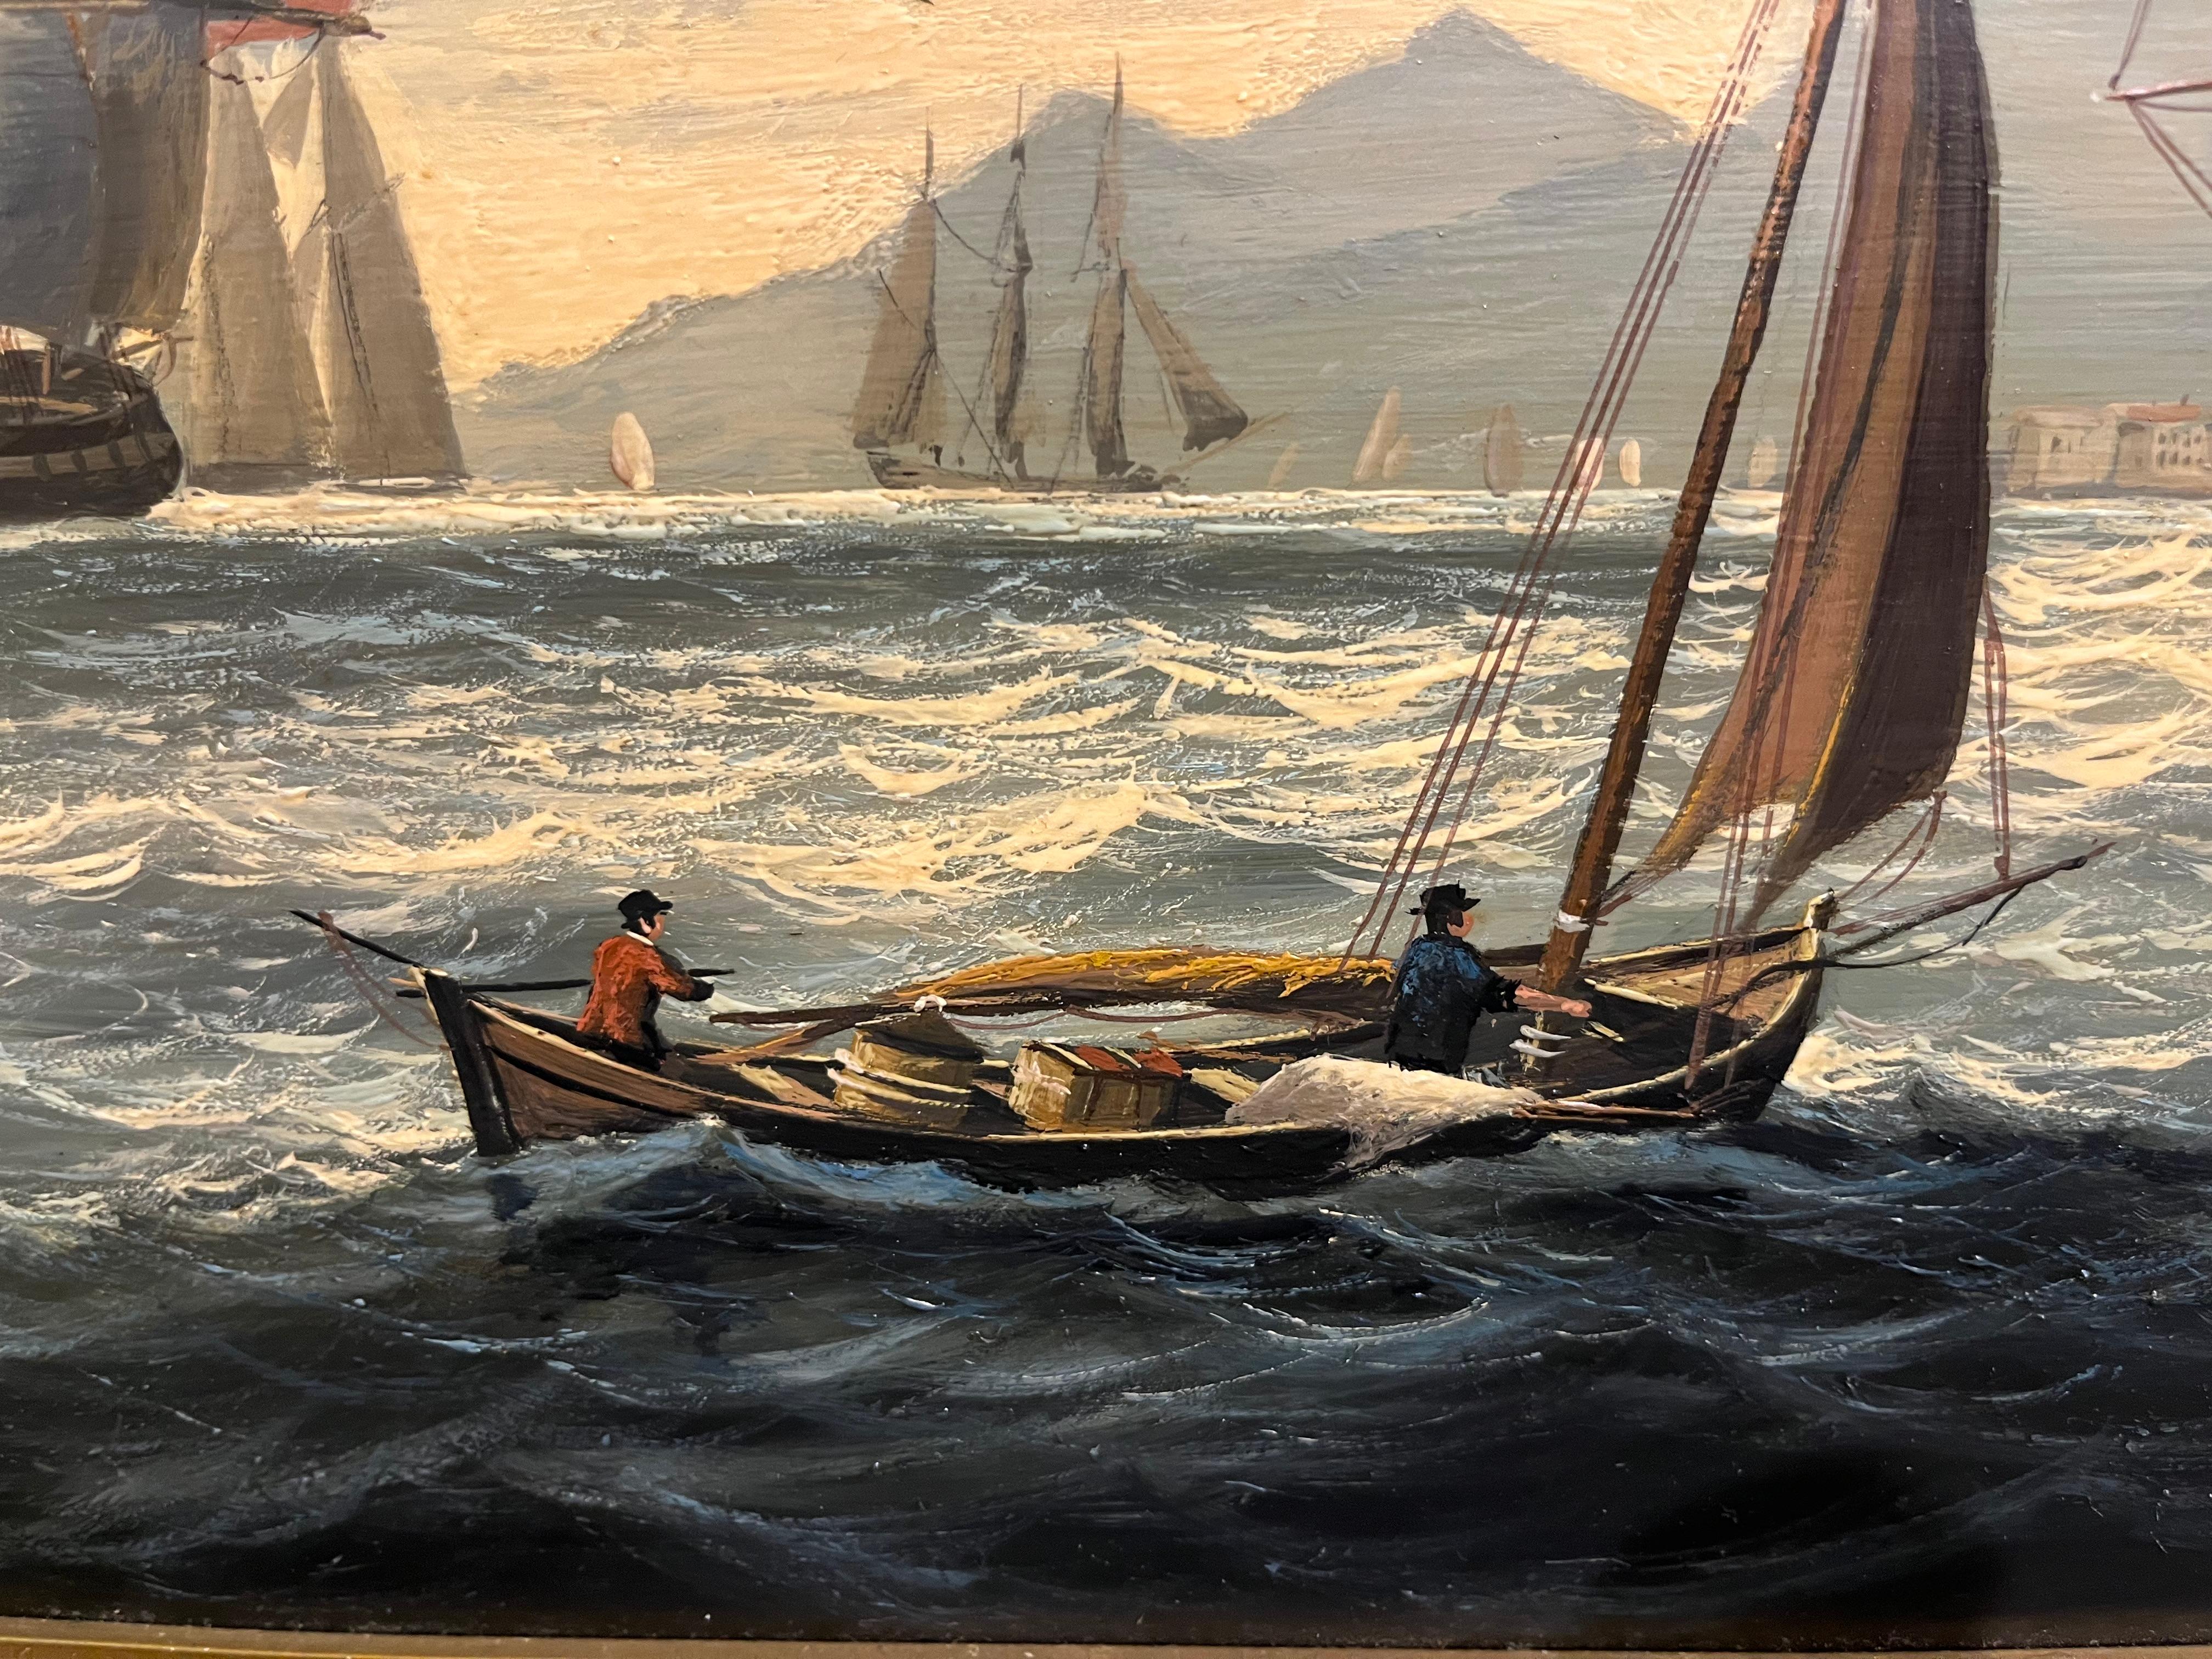 OIL PAINTING LARGE  SALVATORE COLACICCO (NAVY ADMIRALTY 20th CENTURY

Very good condition for age , (see pictures)

FINE RARE MARTINE PAINTING ORIGINAL

20th Century OLD MASTER STYLE OIL PAINTING GOLD GILT FRAME

By Similar $12,000 Premier